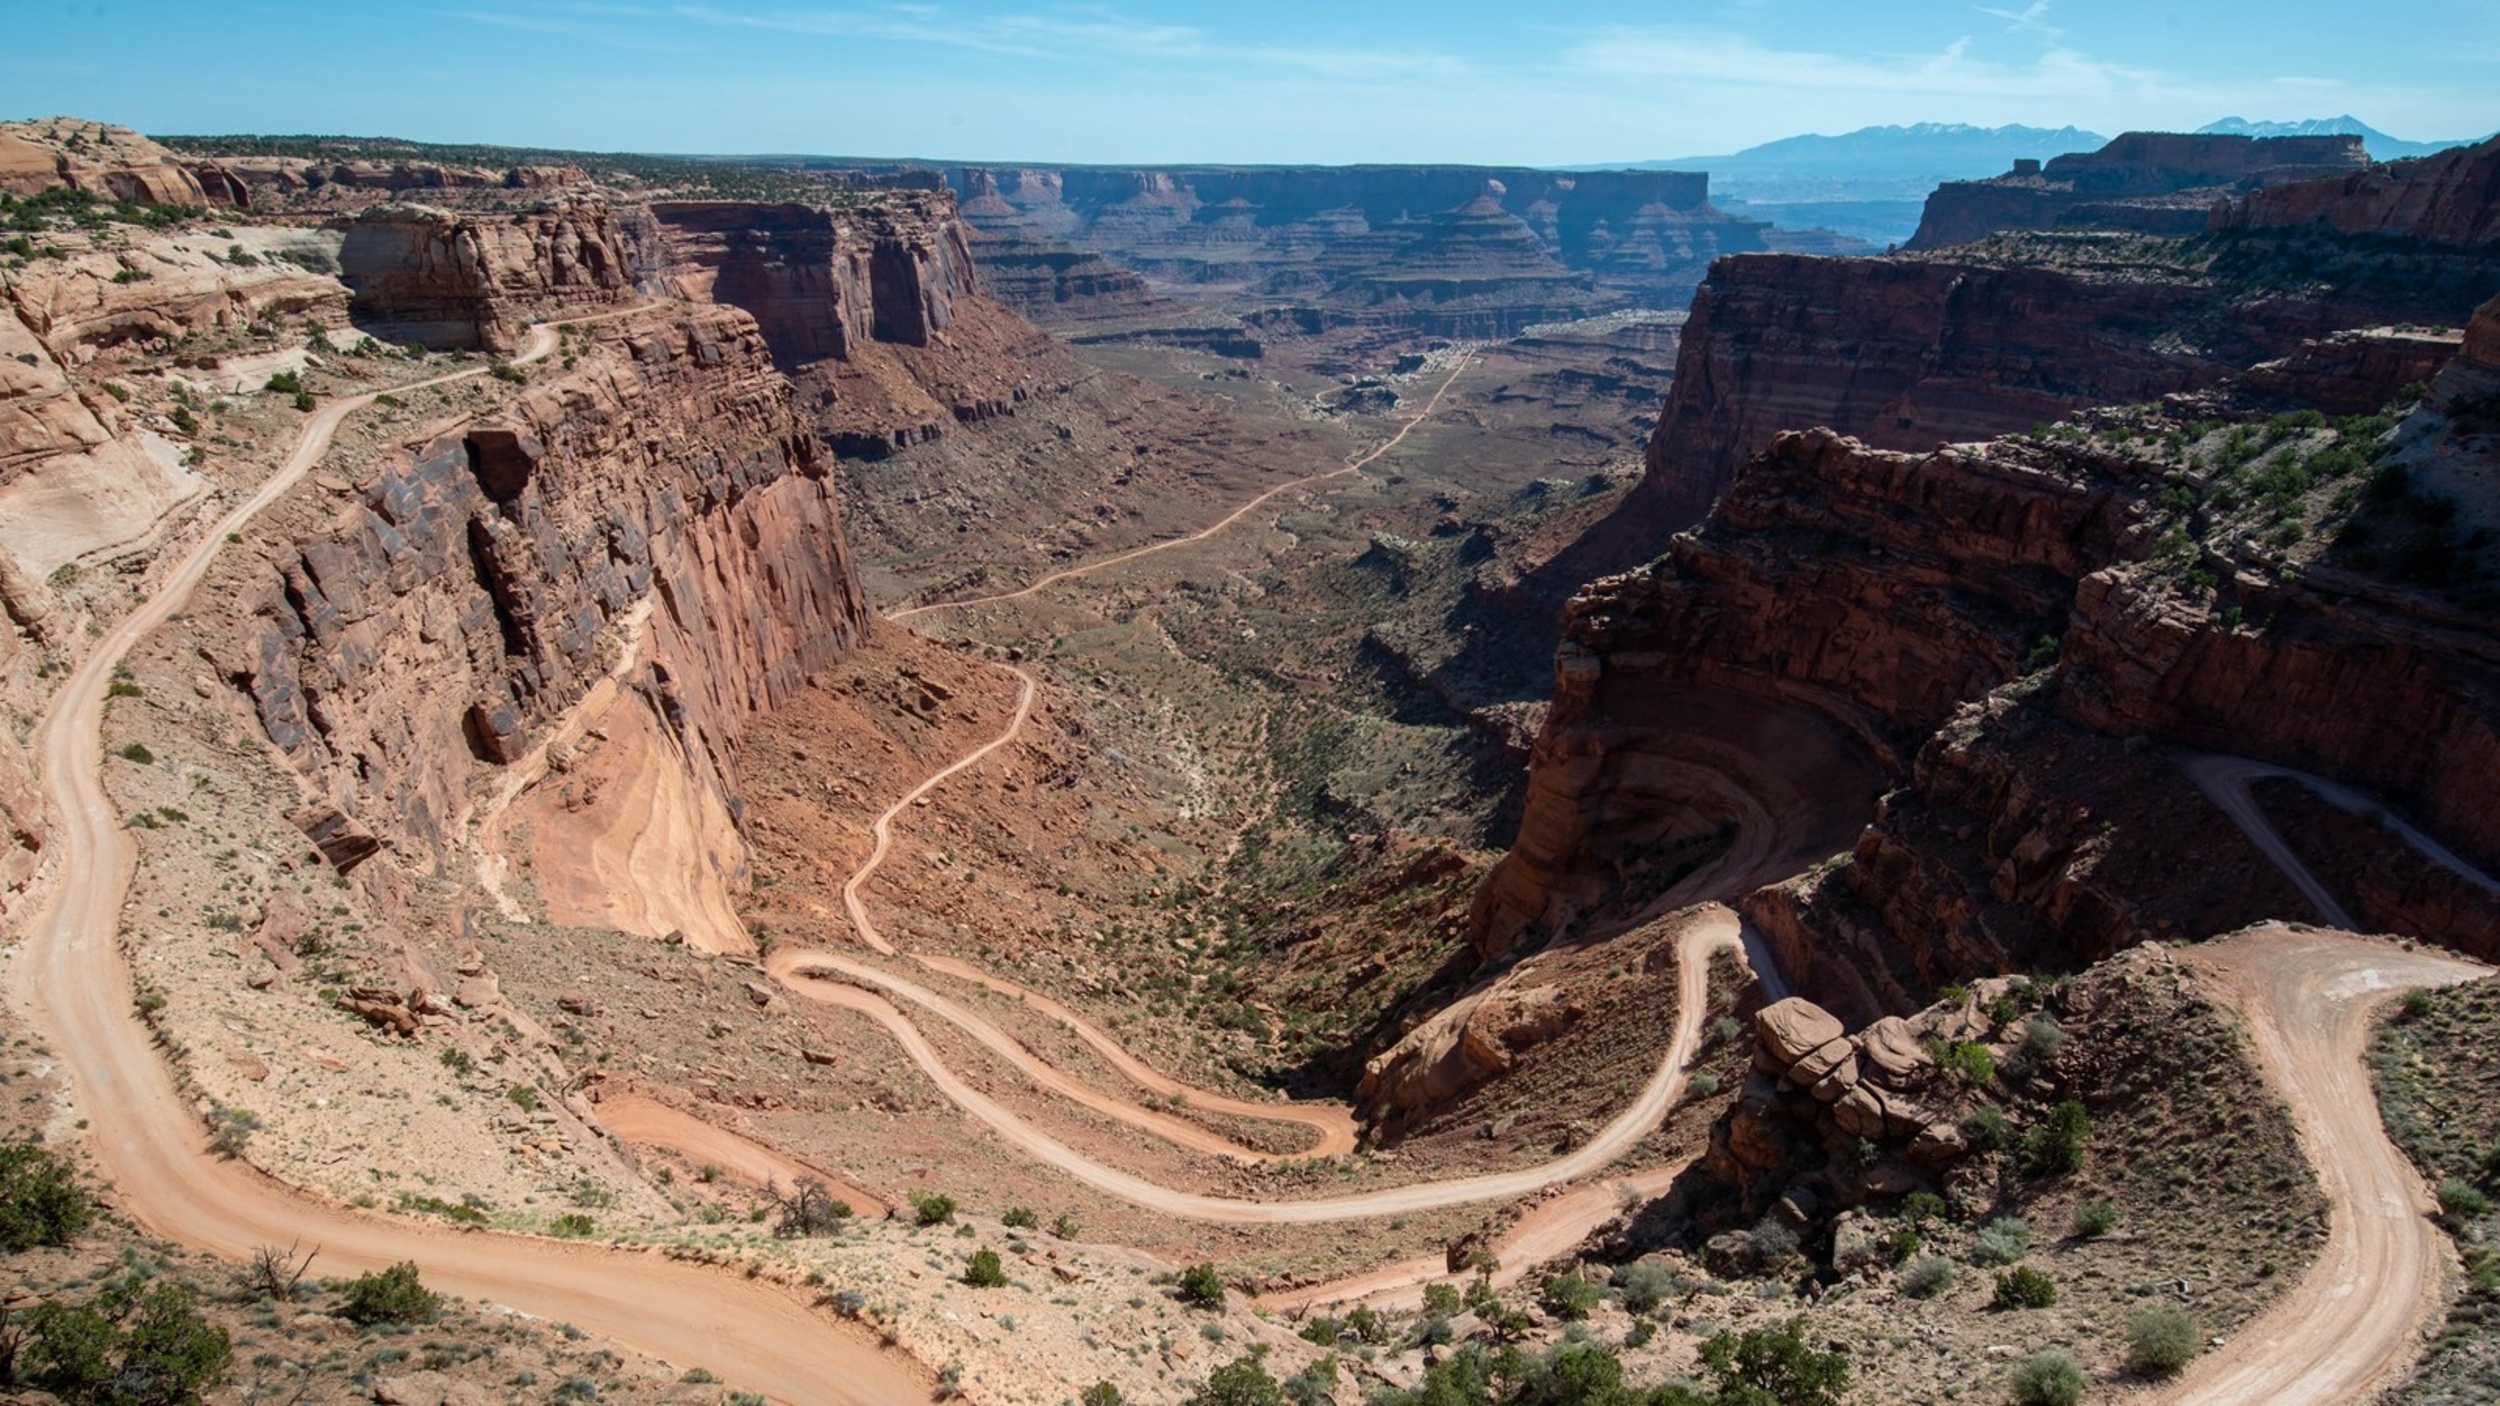 <p>Here's your chance to drive on one of America's most windy roads. You'll follow switchbacks through canyons until you reach a thousand-foot cliff — the very same one Thelma and Louise drove off at the end of their trip. </p>